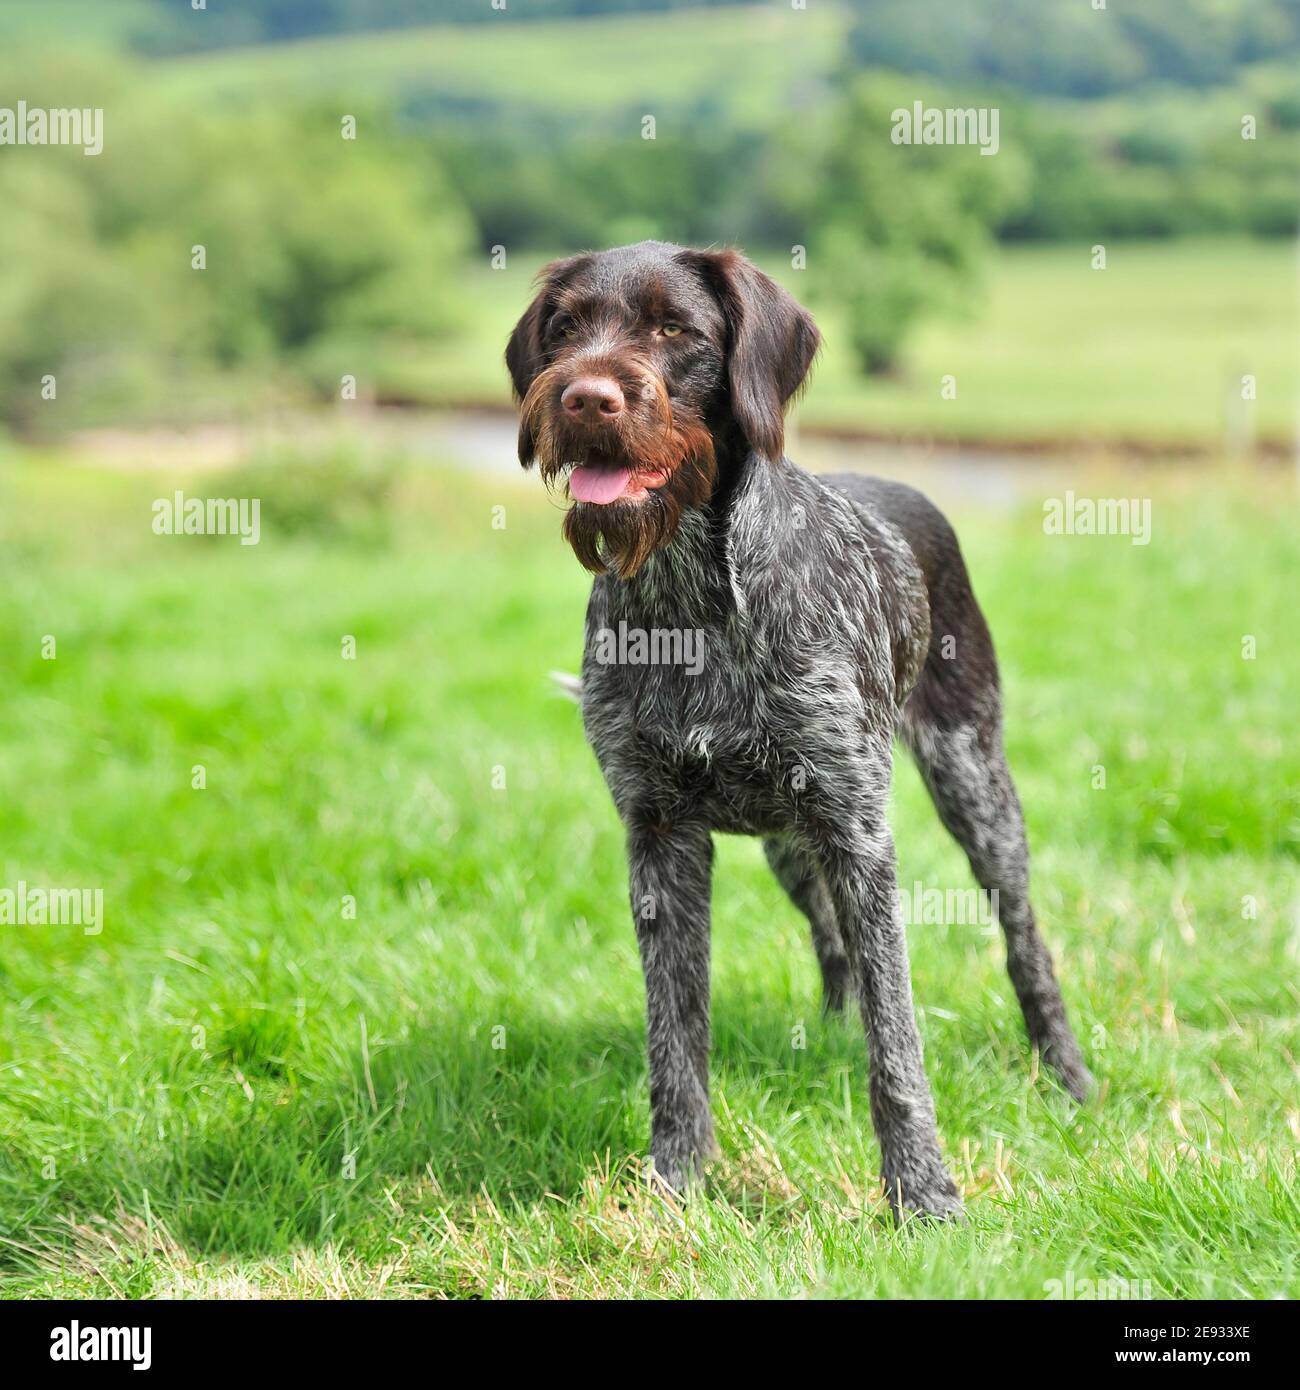 GWP, German wirehaired pointer Stock Photo